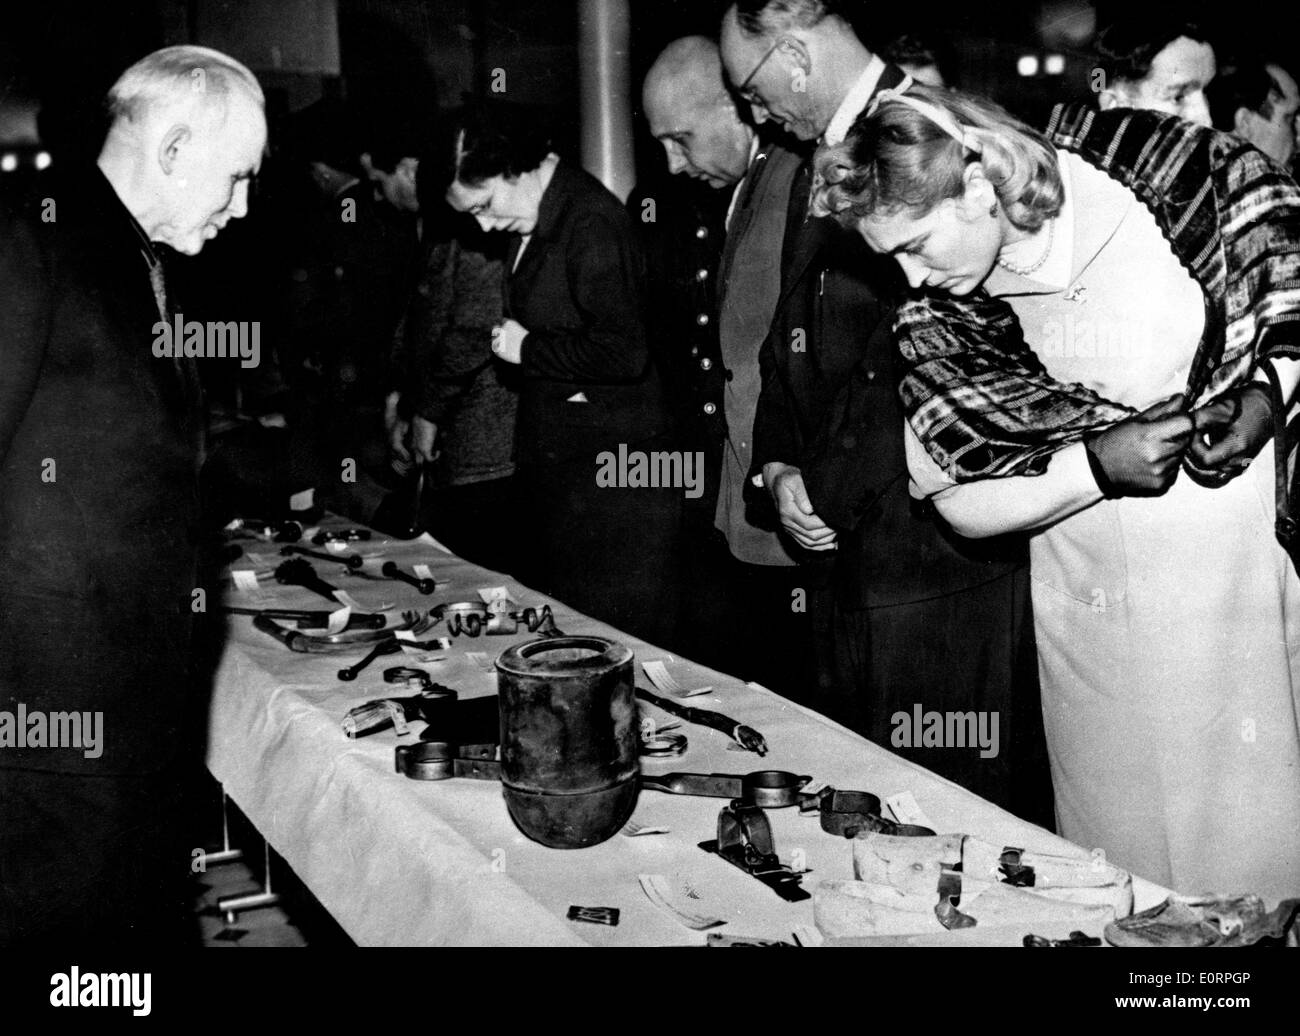 People looking at torture instruments by which prisoners of concentration camps were tormented Stock Photo